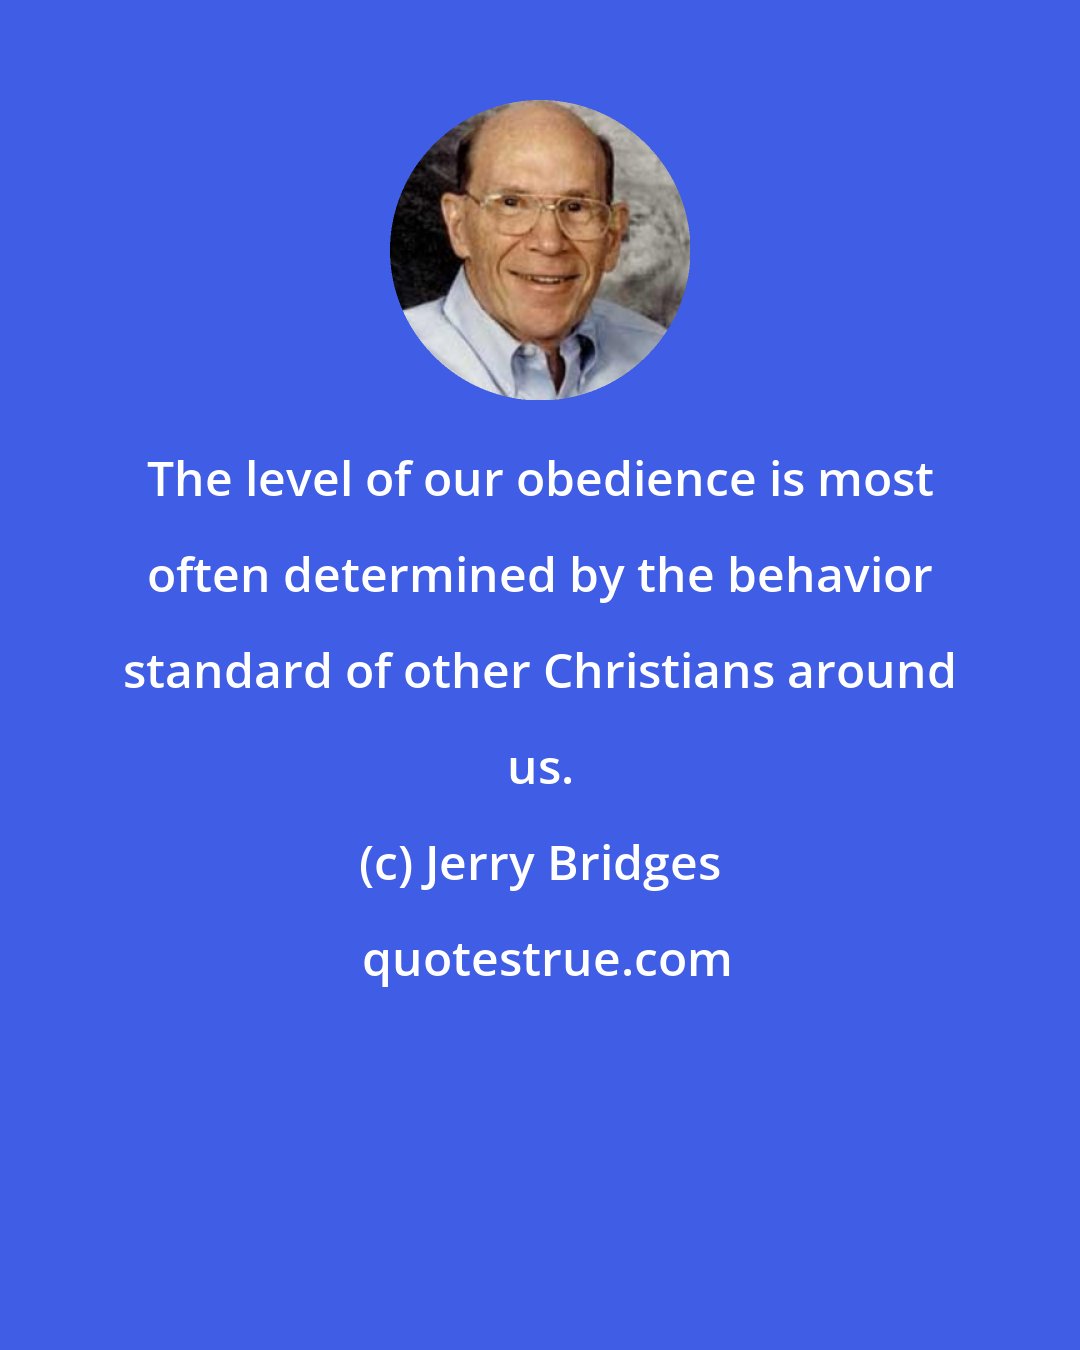 Jerry Bridges: The level of our obedience is most often determined by the behavior standard of other Christians around us.